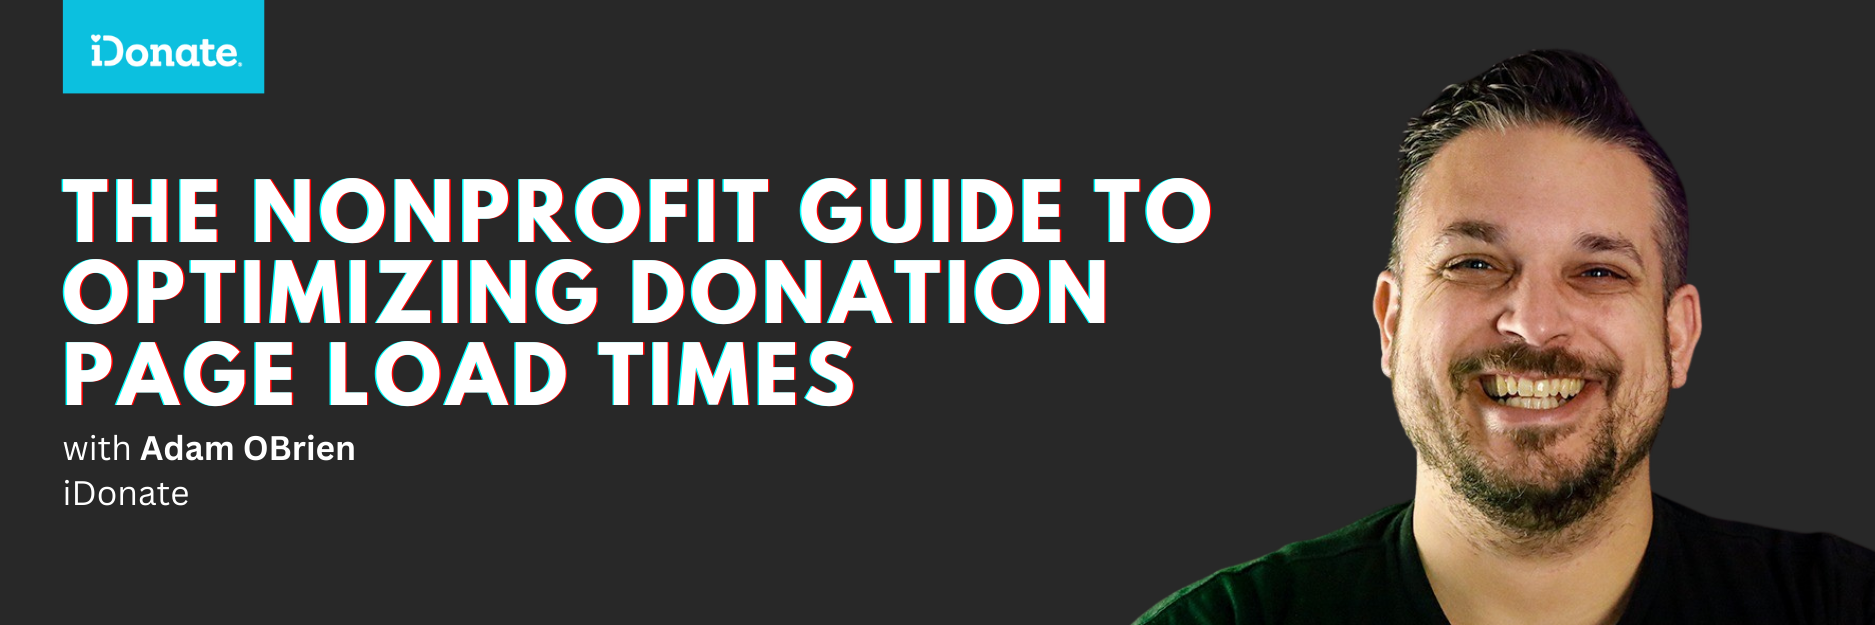 The Nonprofit Guide to Optimizing Donation Page Load Time